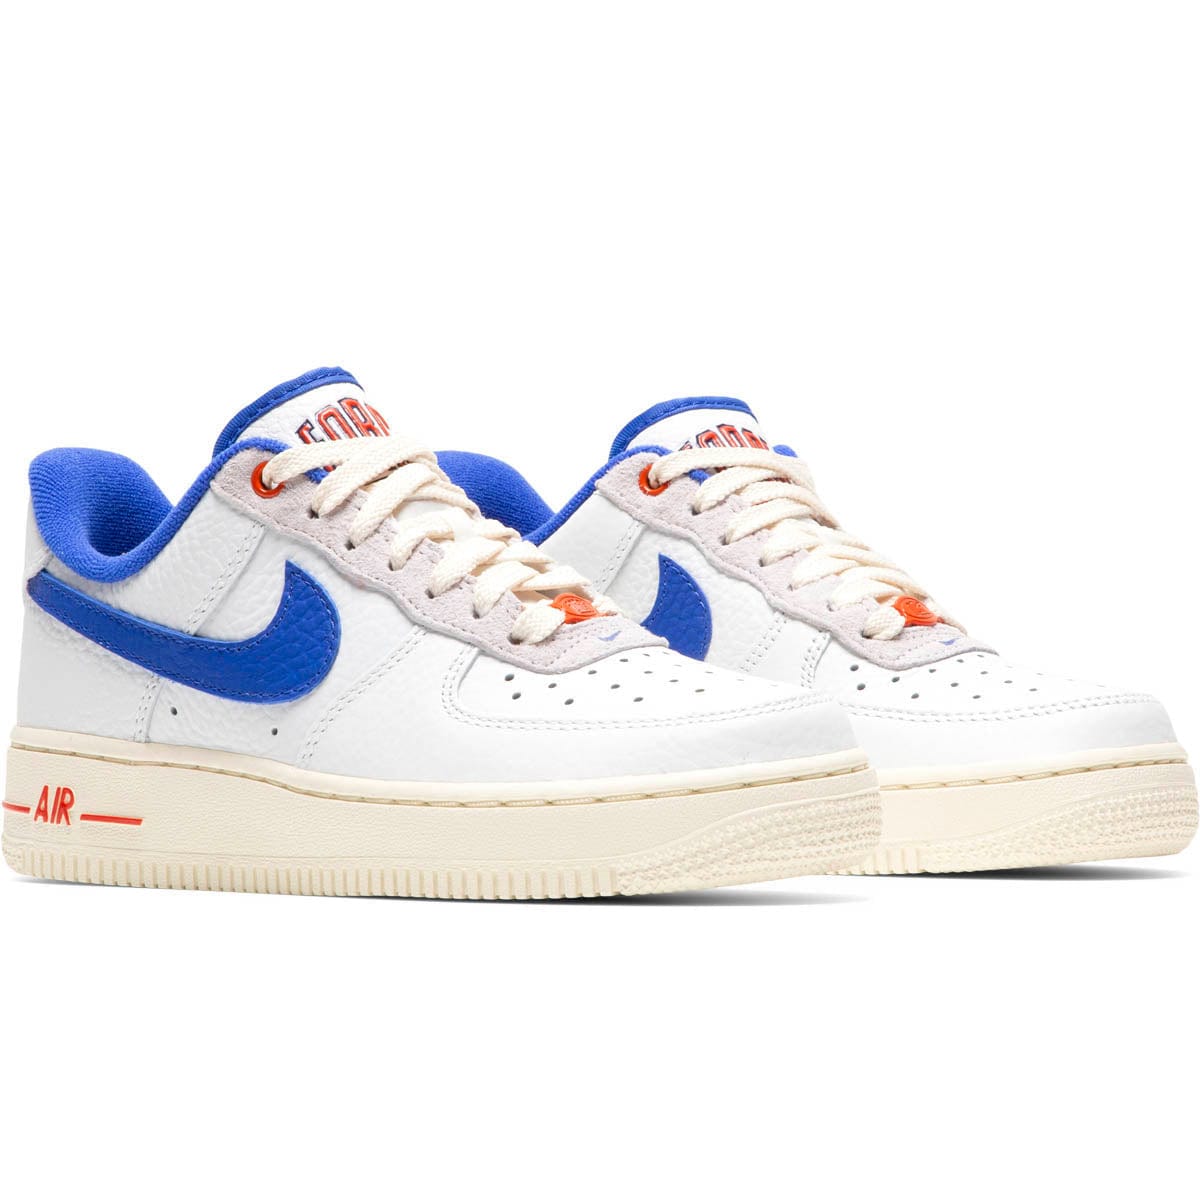 Nike WMNS Air Force 1 Low Command Force University Blue